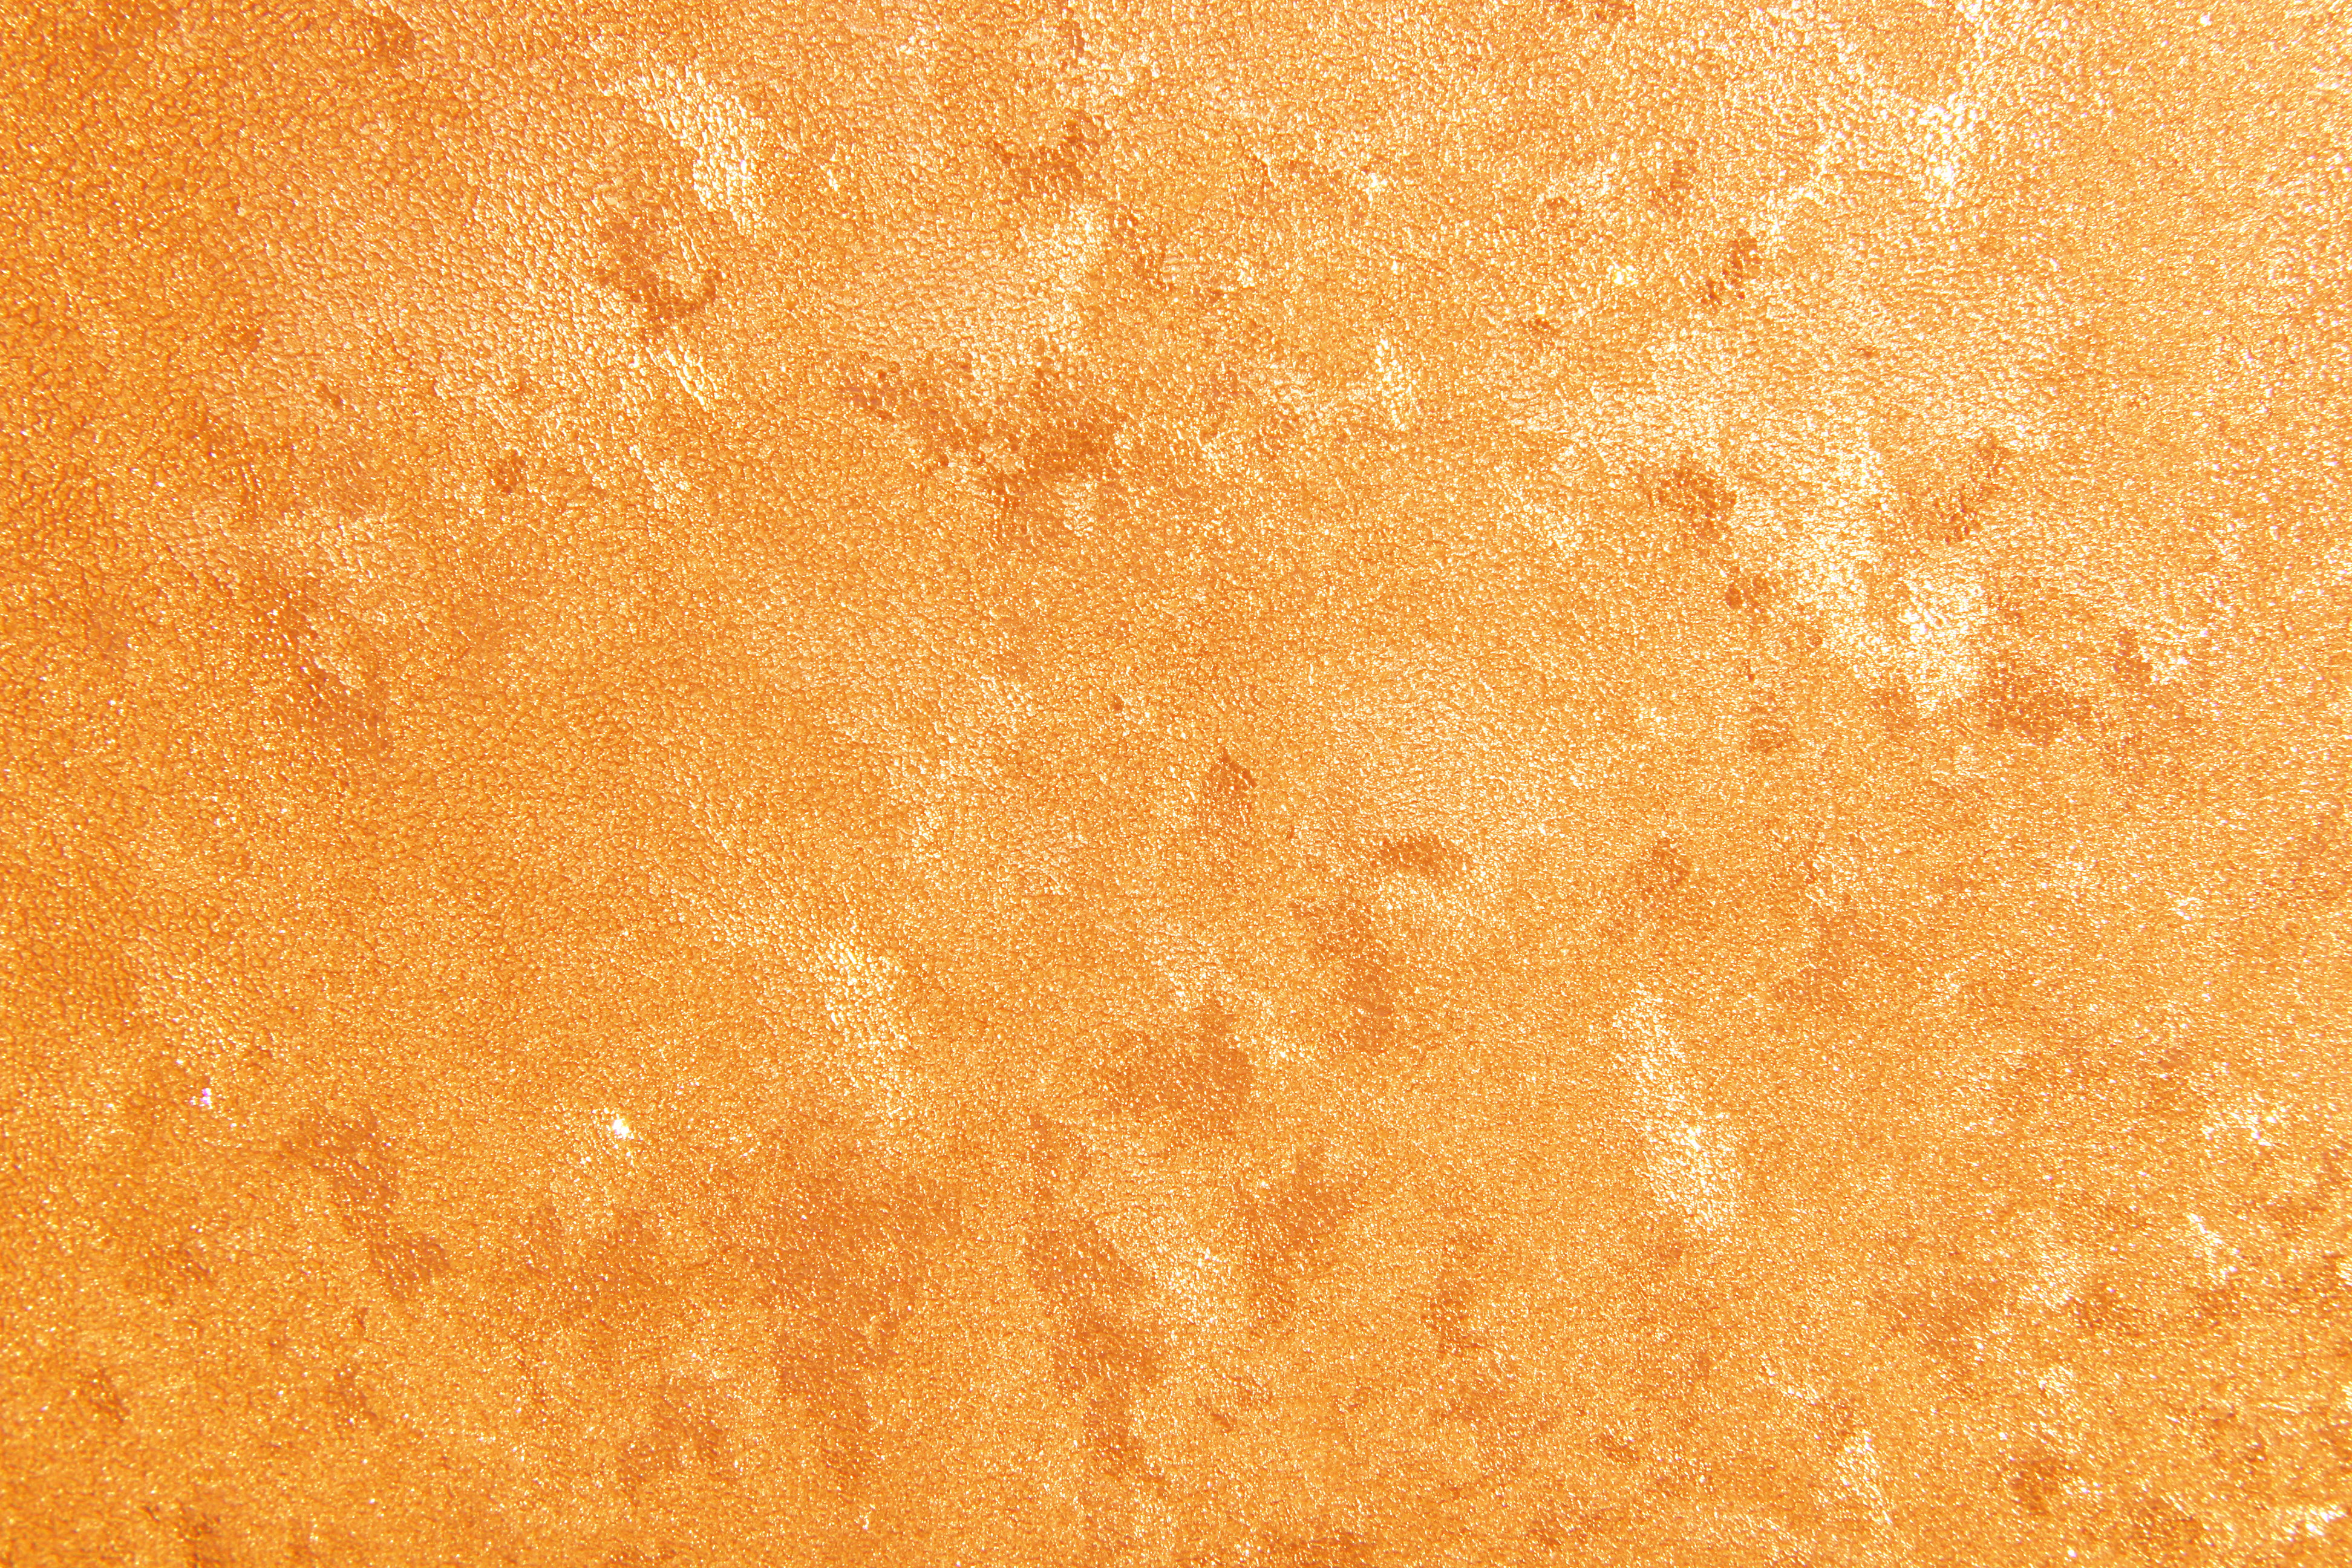 Frost on Glass Close Up Texture Colorized Orange Picture | Free ...